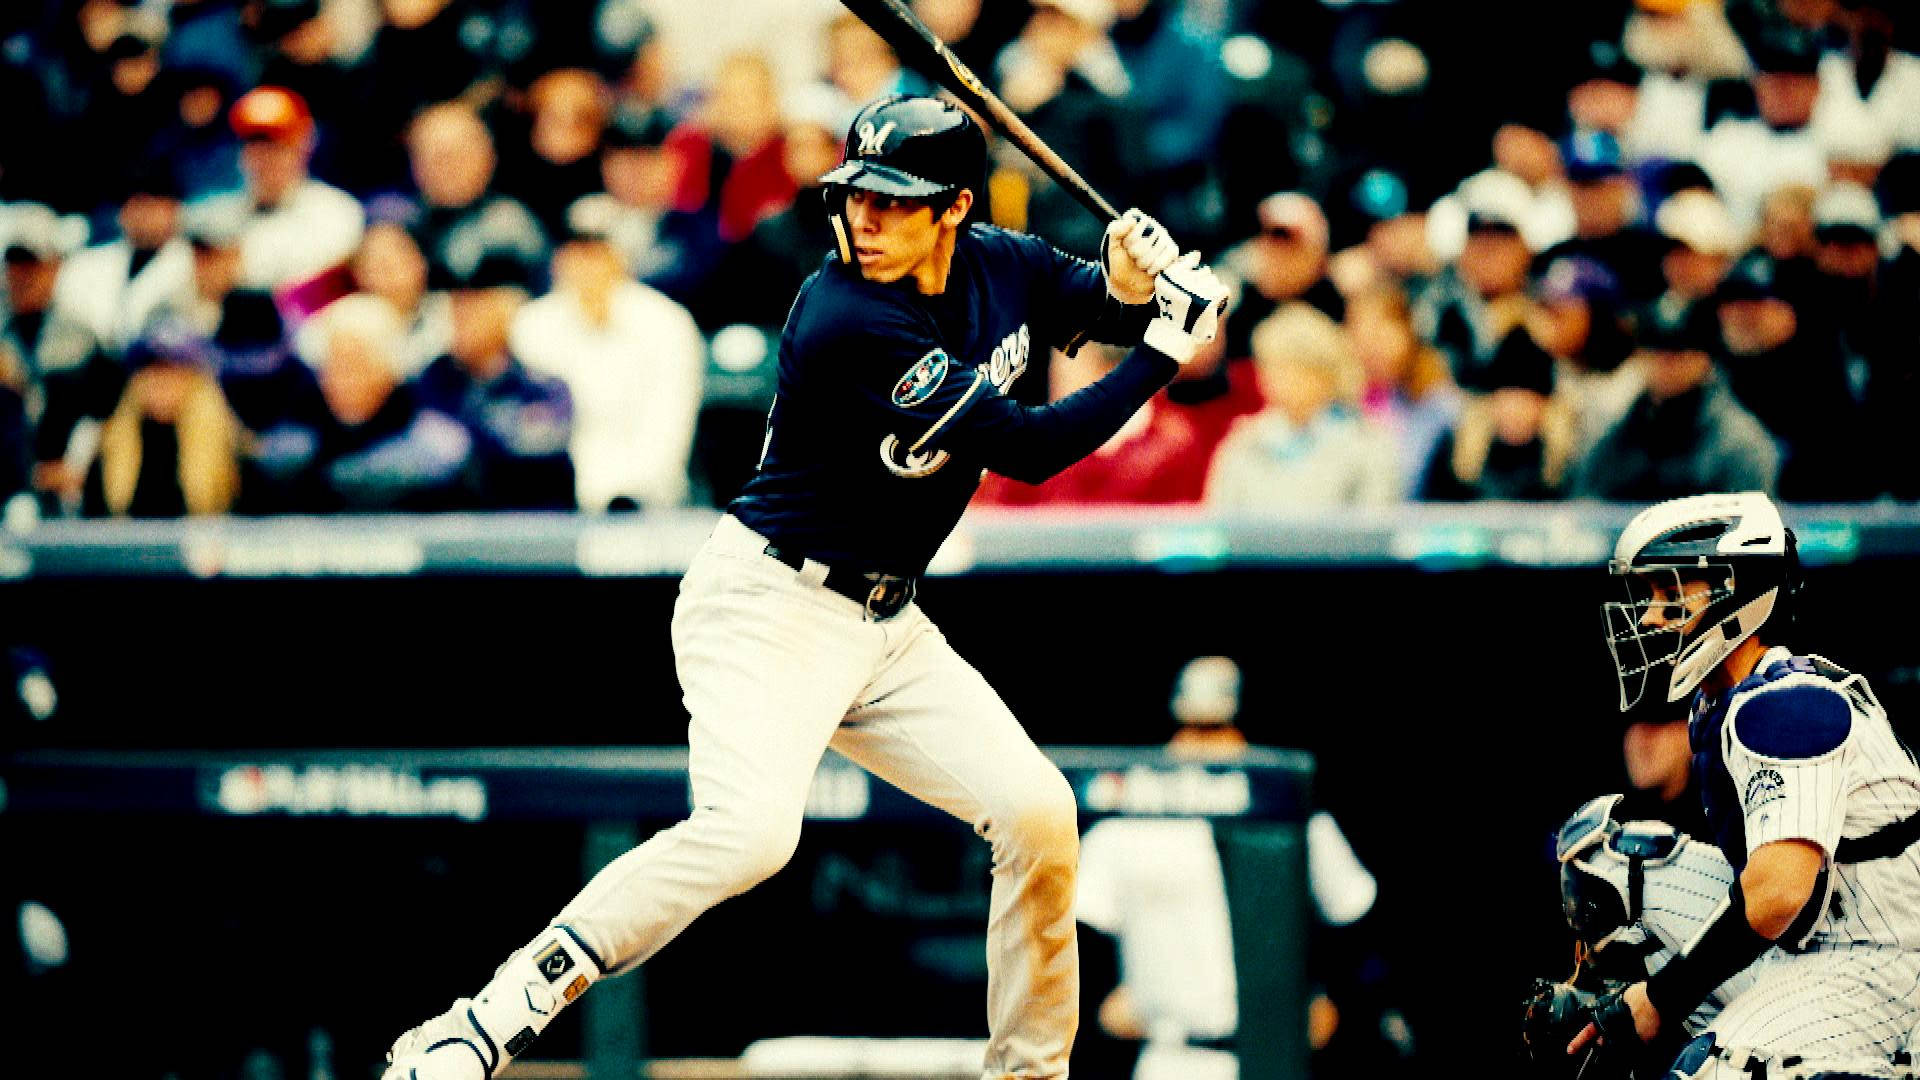 willy adames wallpaper